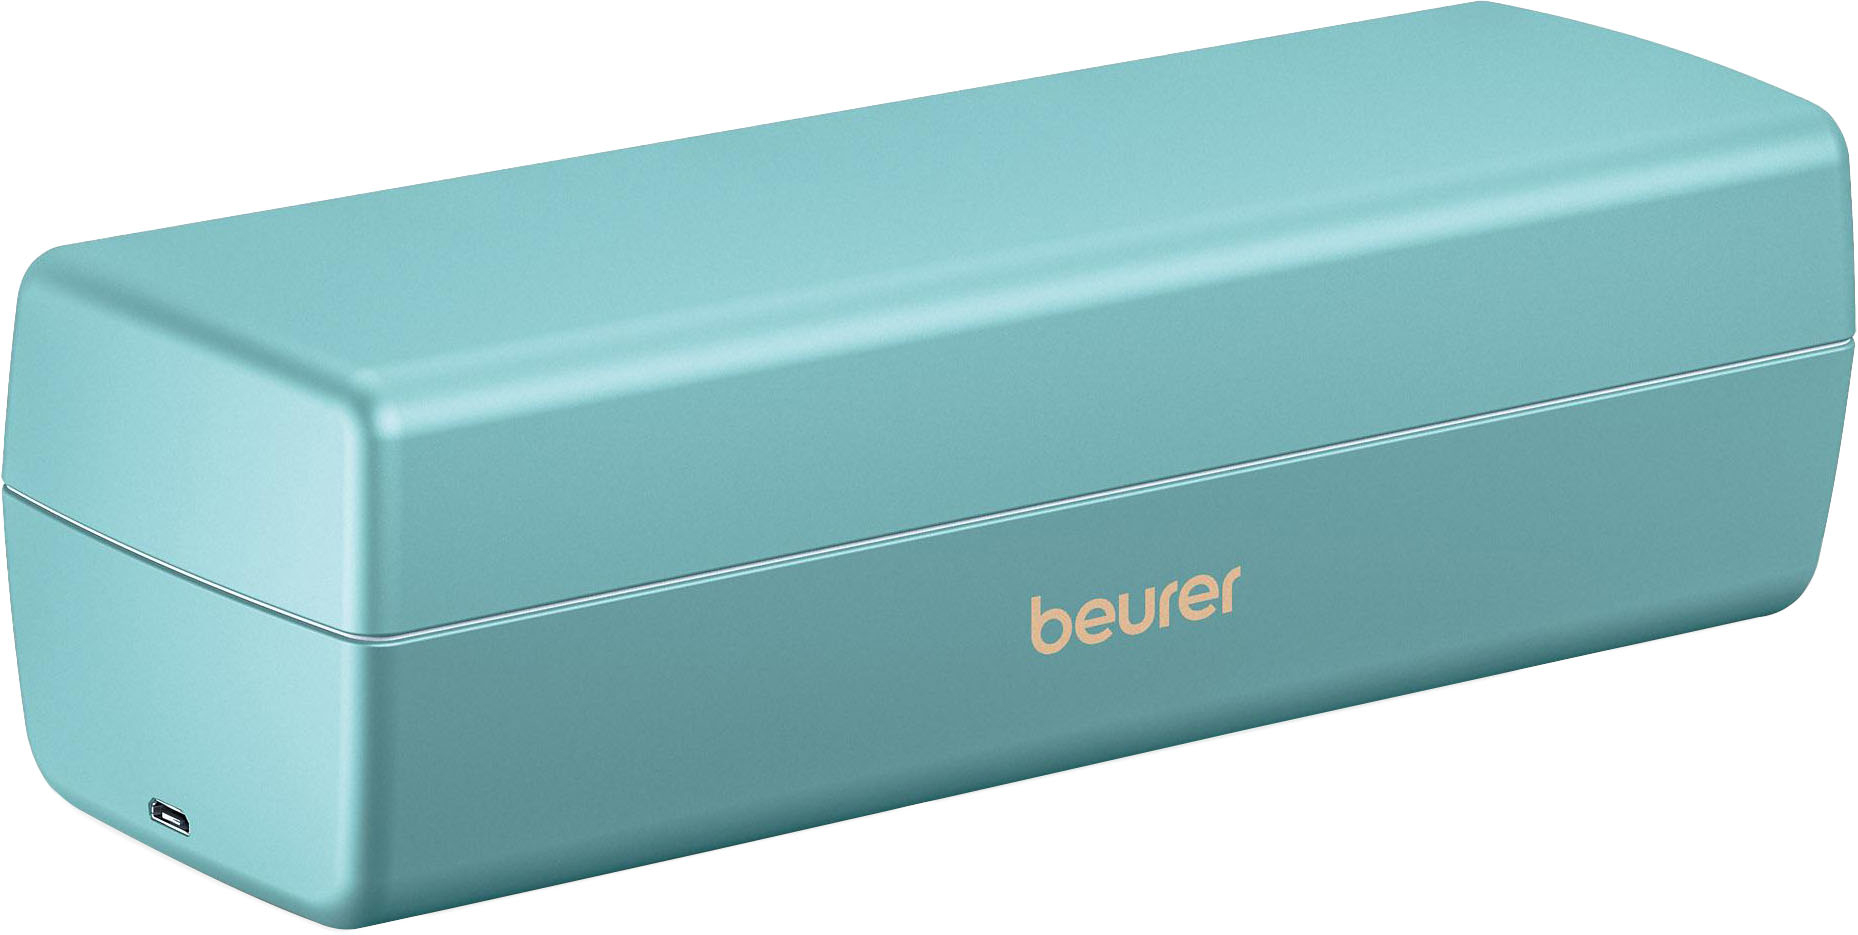 Beurer Rechargeable Manicure/Pedicure Device Turquoise/Gold MP84 - Best Buy